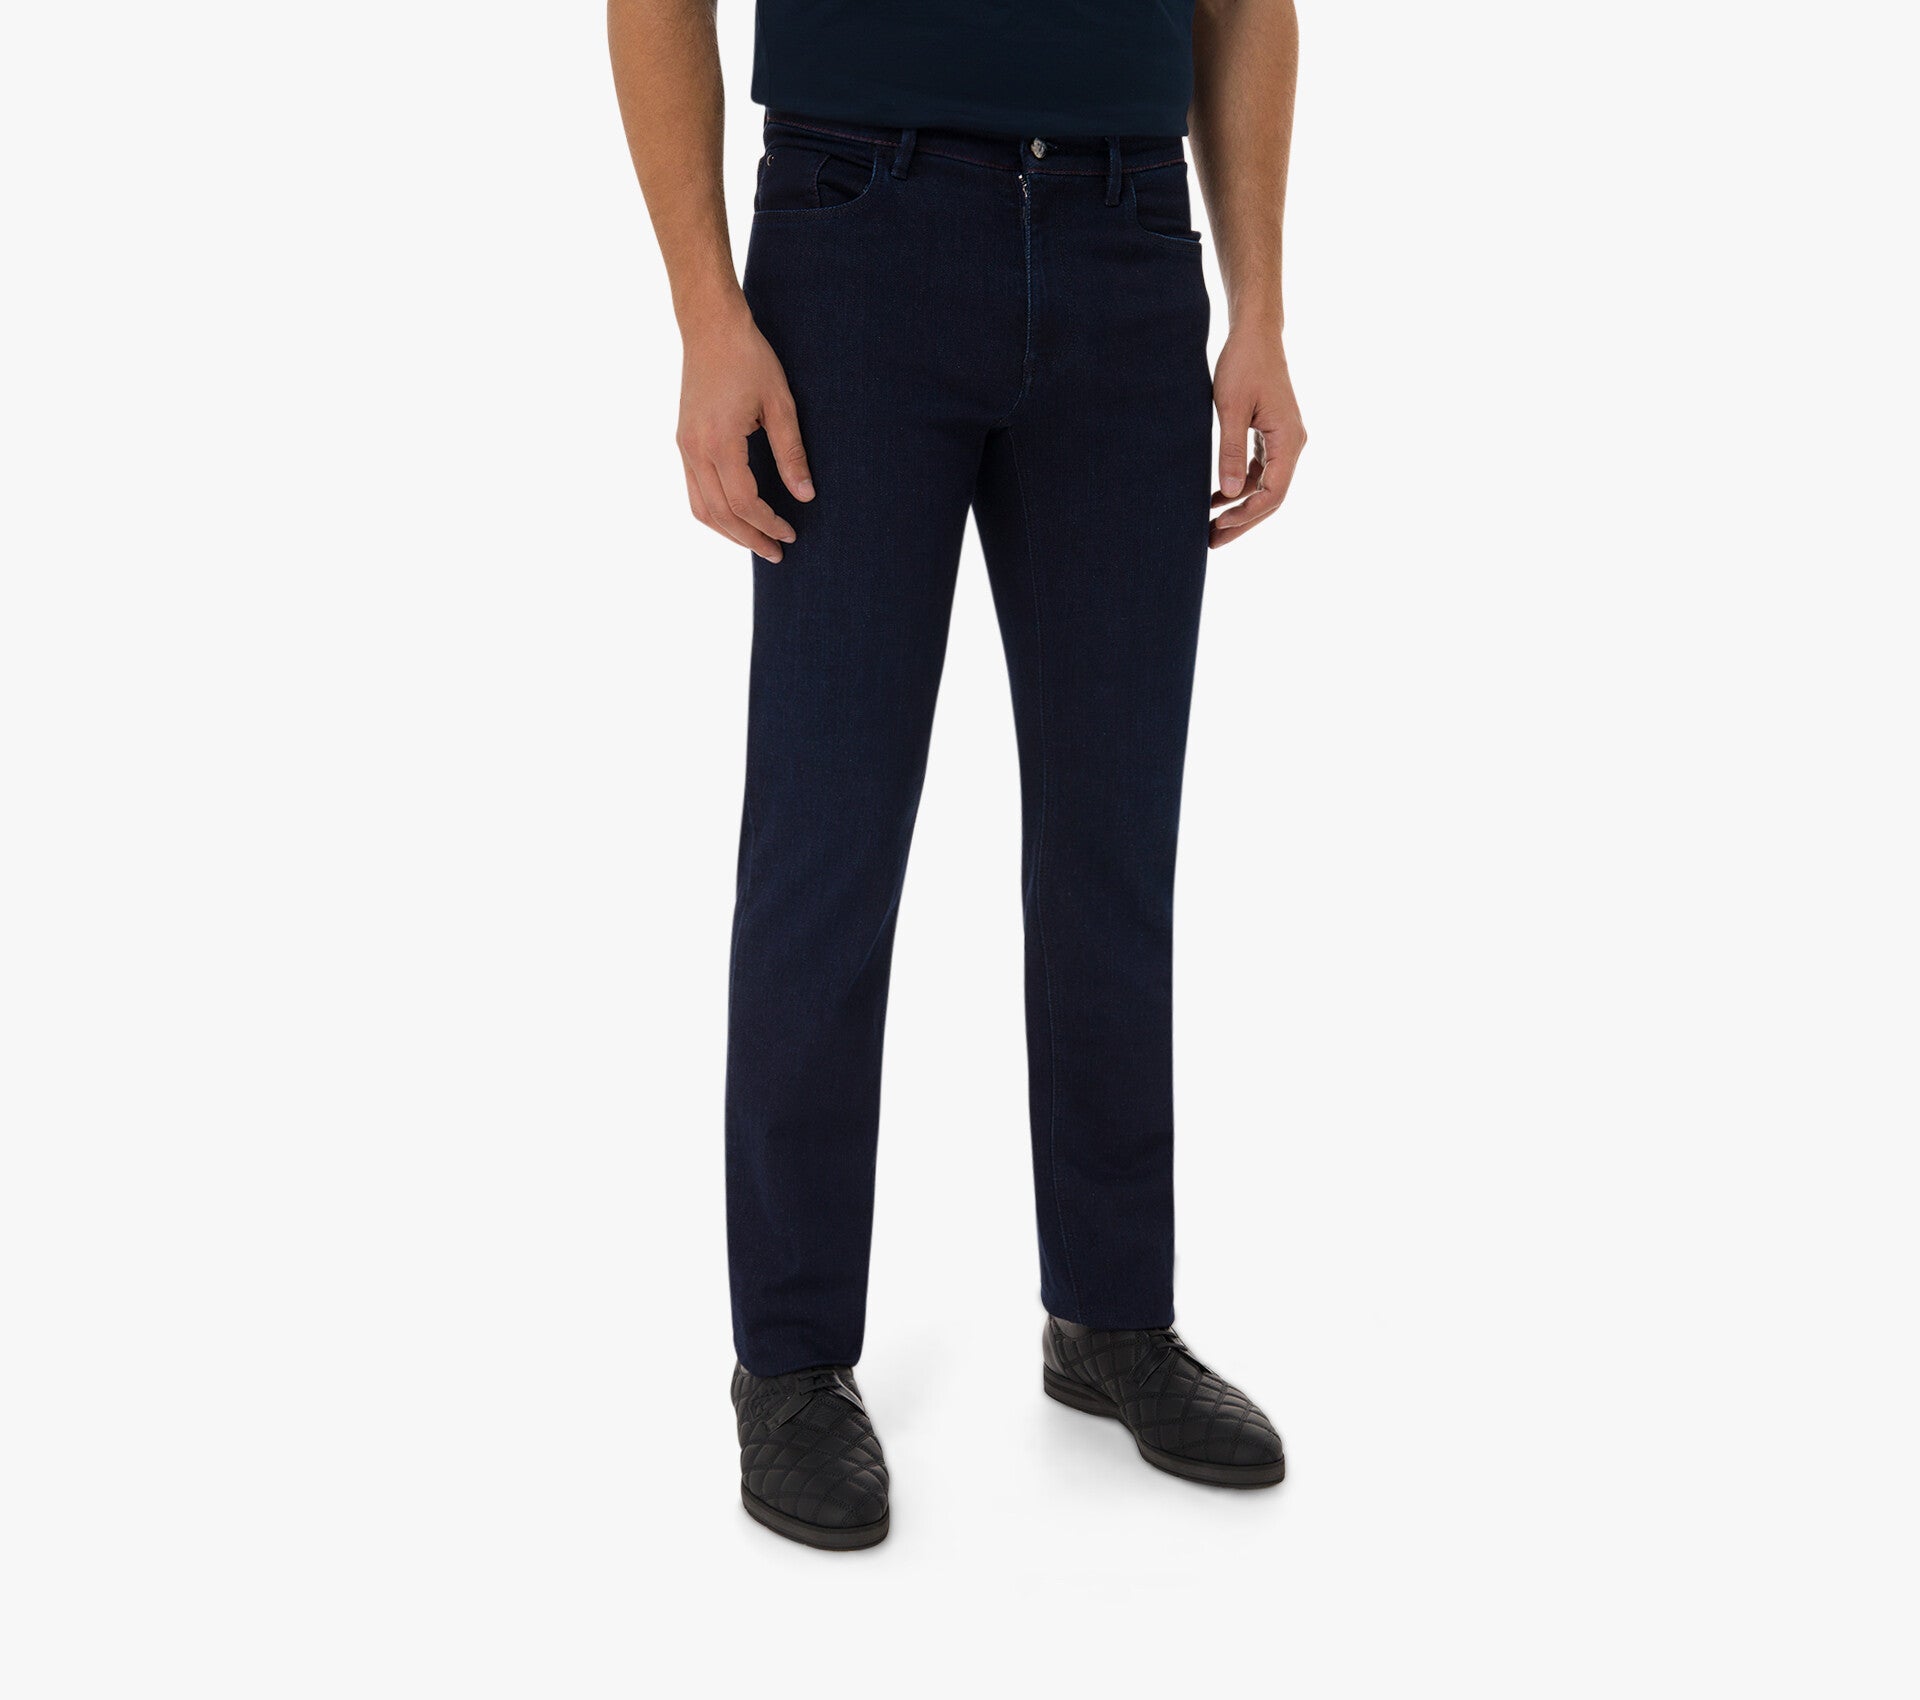 Zilli Regular Fit Jeans - Iconic Lion Embroidery